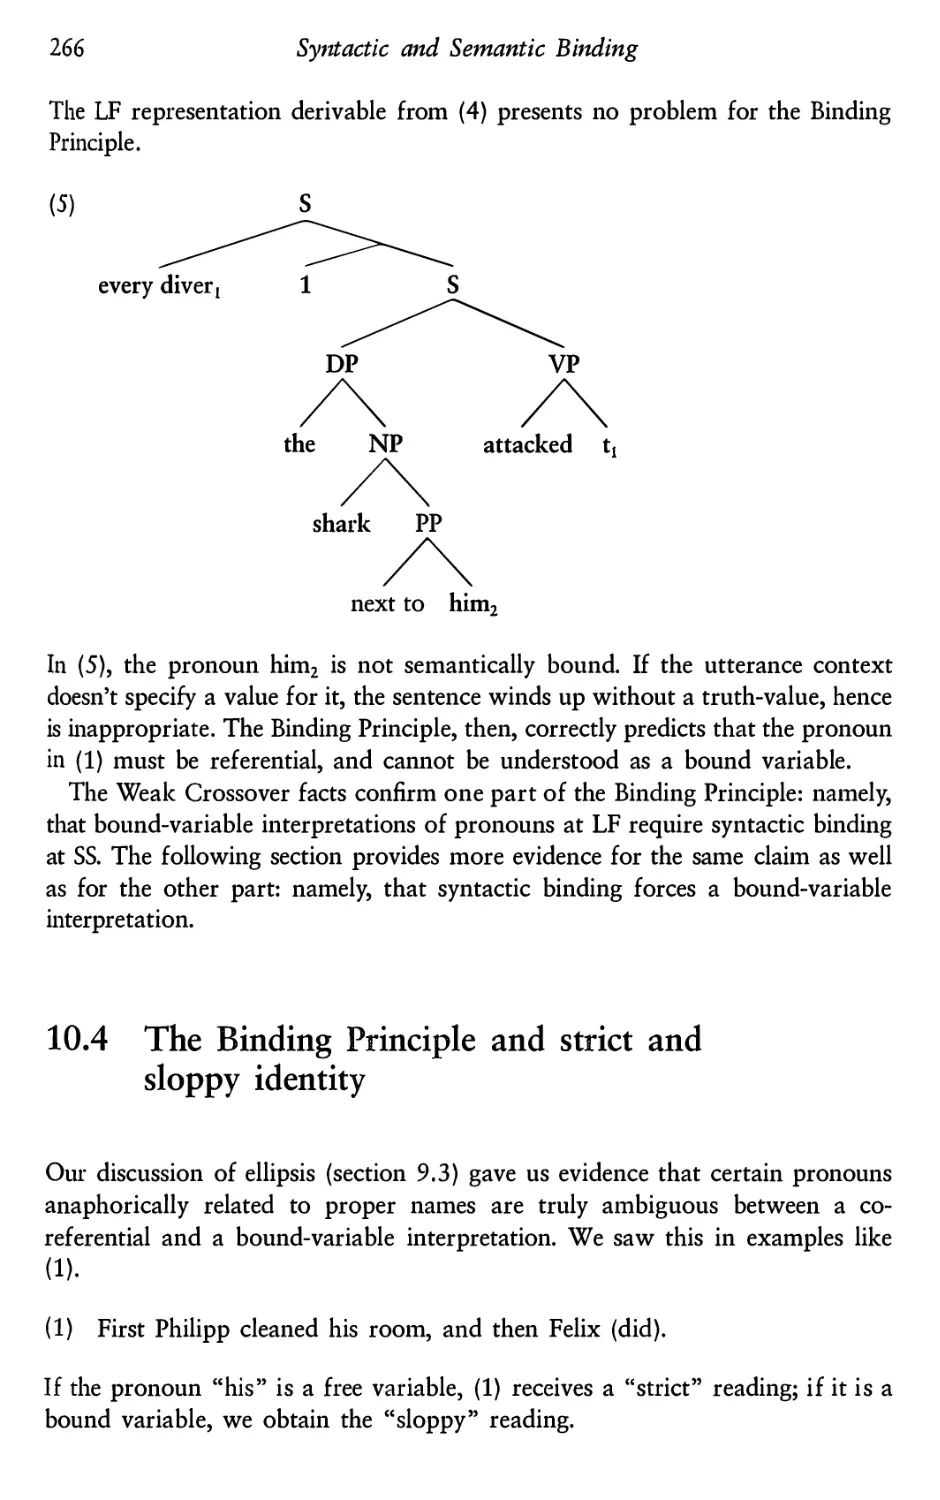 10.4 The Binding Principle and strict and sloppy identity